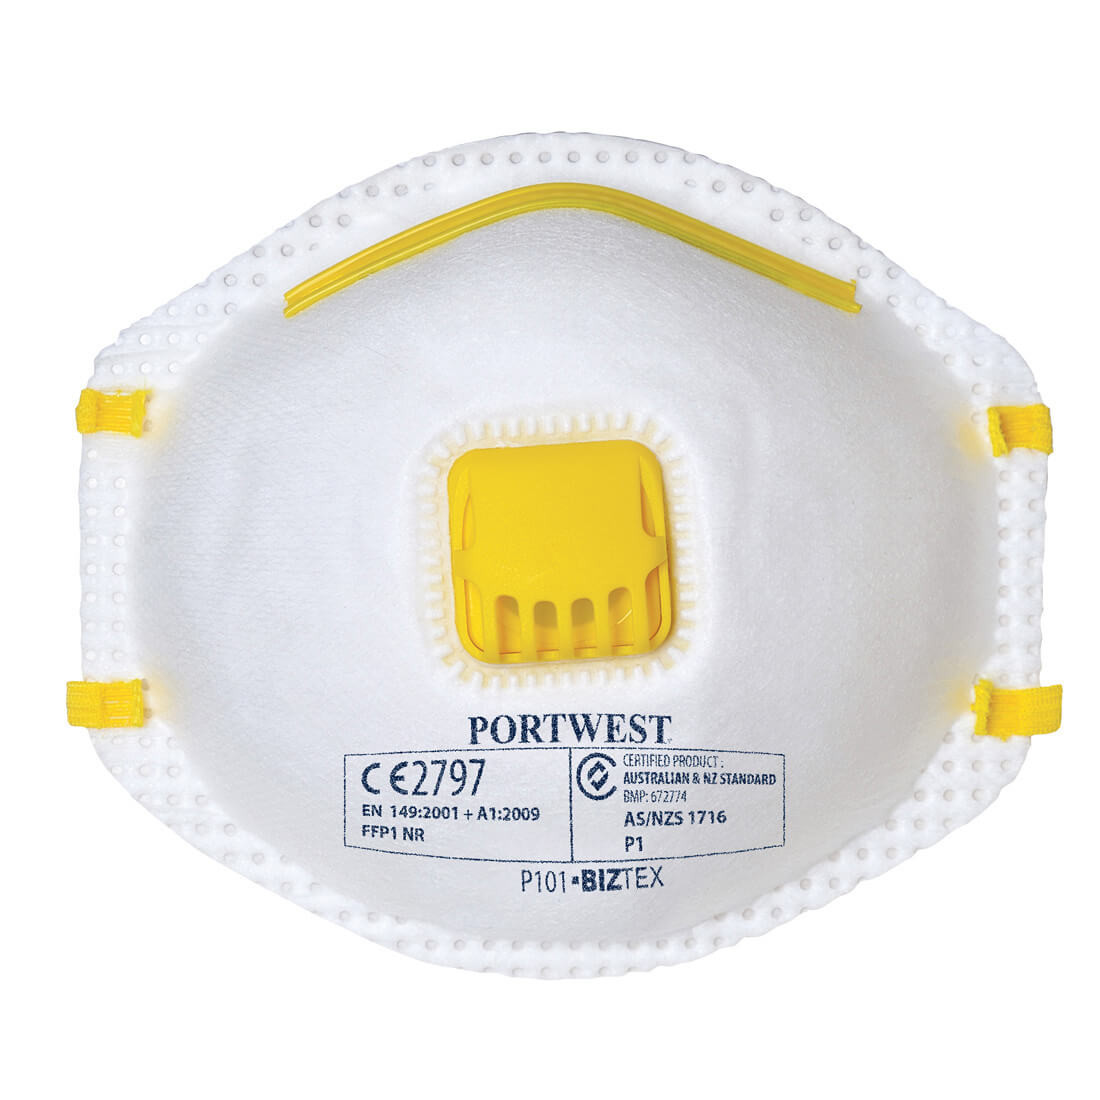 FFP1 Valved Dust Mist Respirator - Personal protection